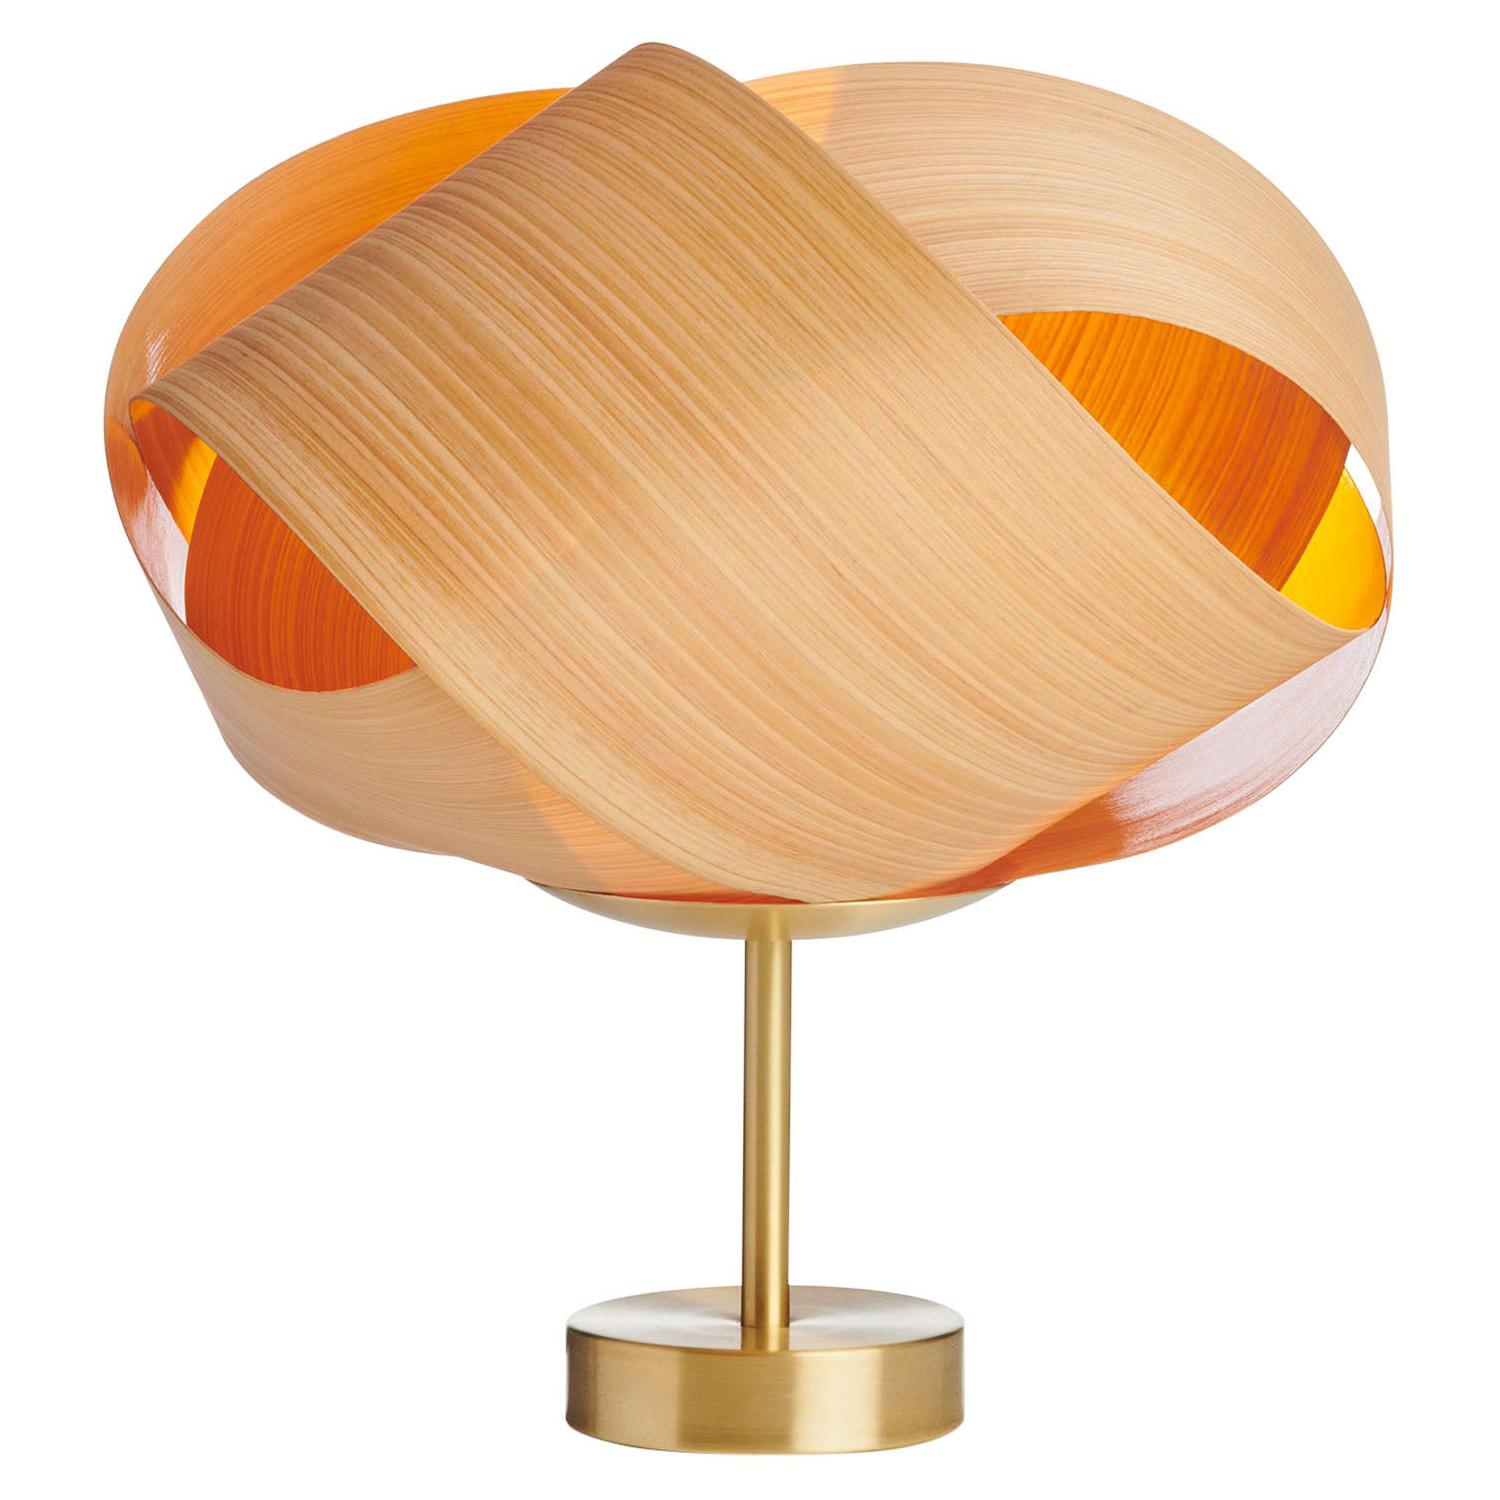 Limited-Edition Cypress Wood Accent Light with Brushed Brass Stand